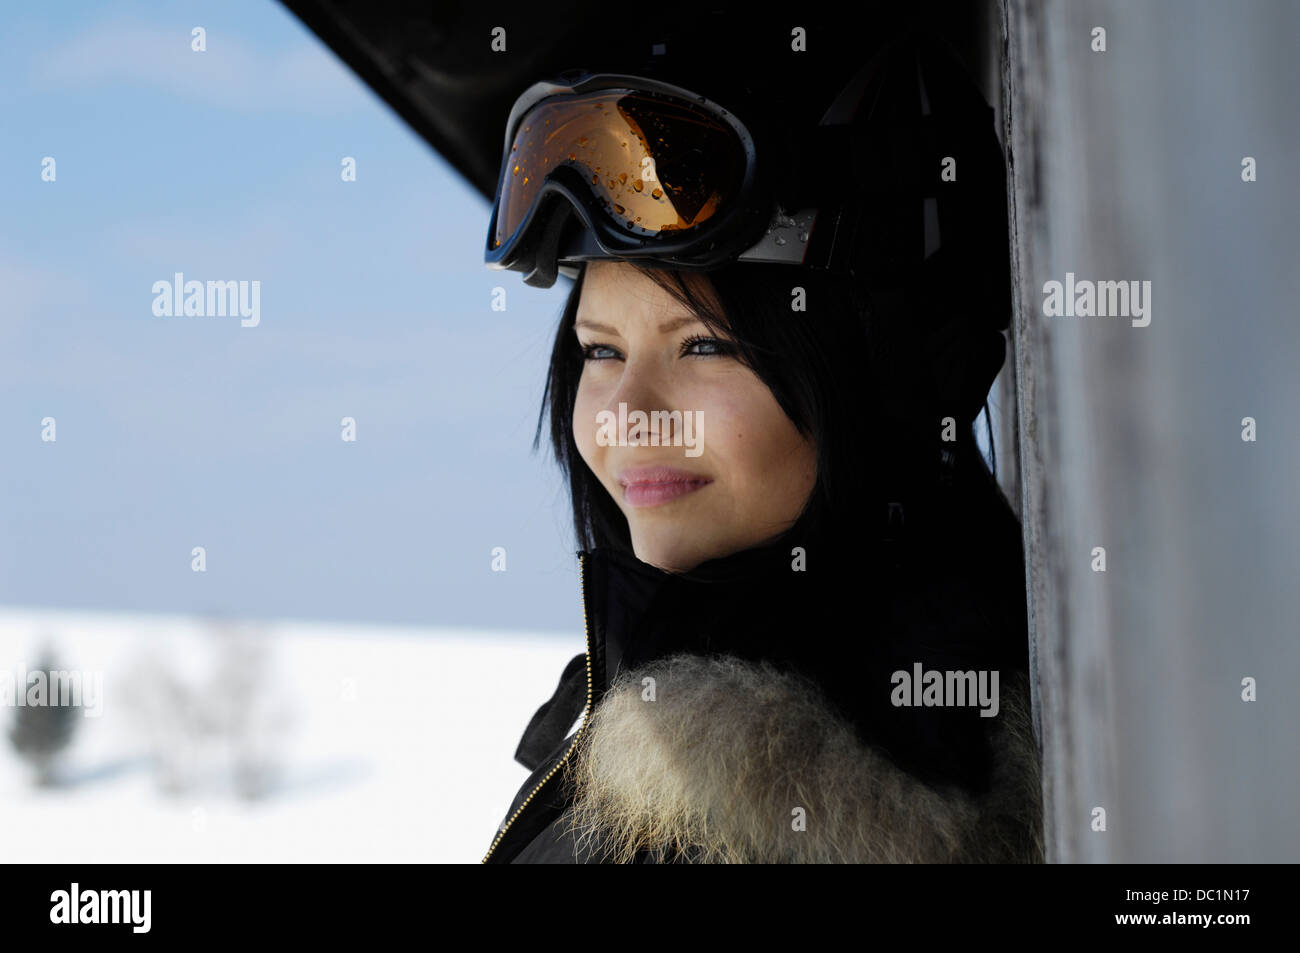 Close up portrait of young female wearing ski goggles Stock Photo